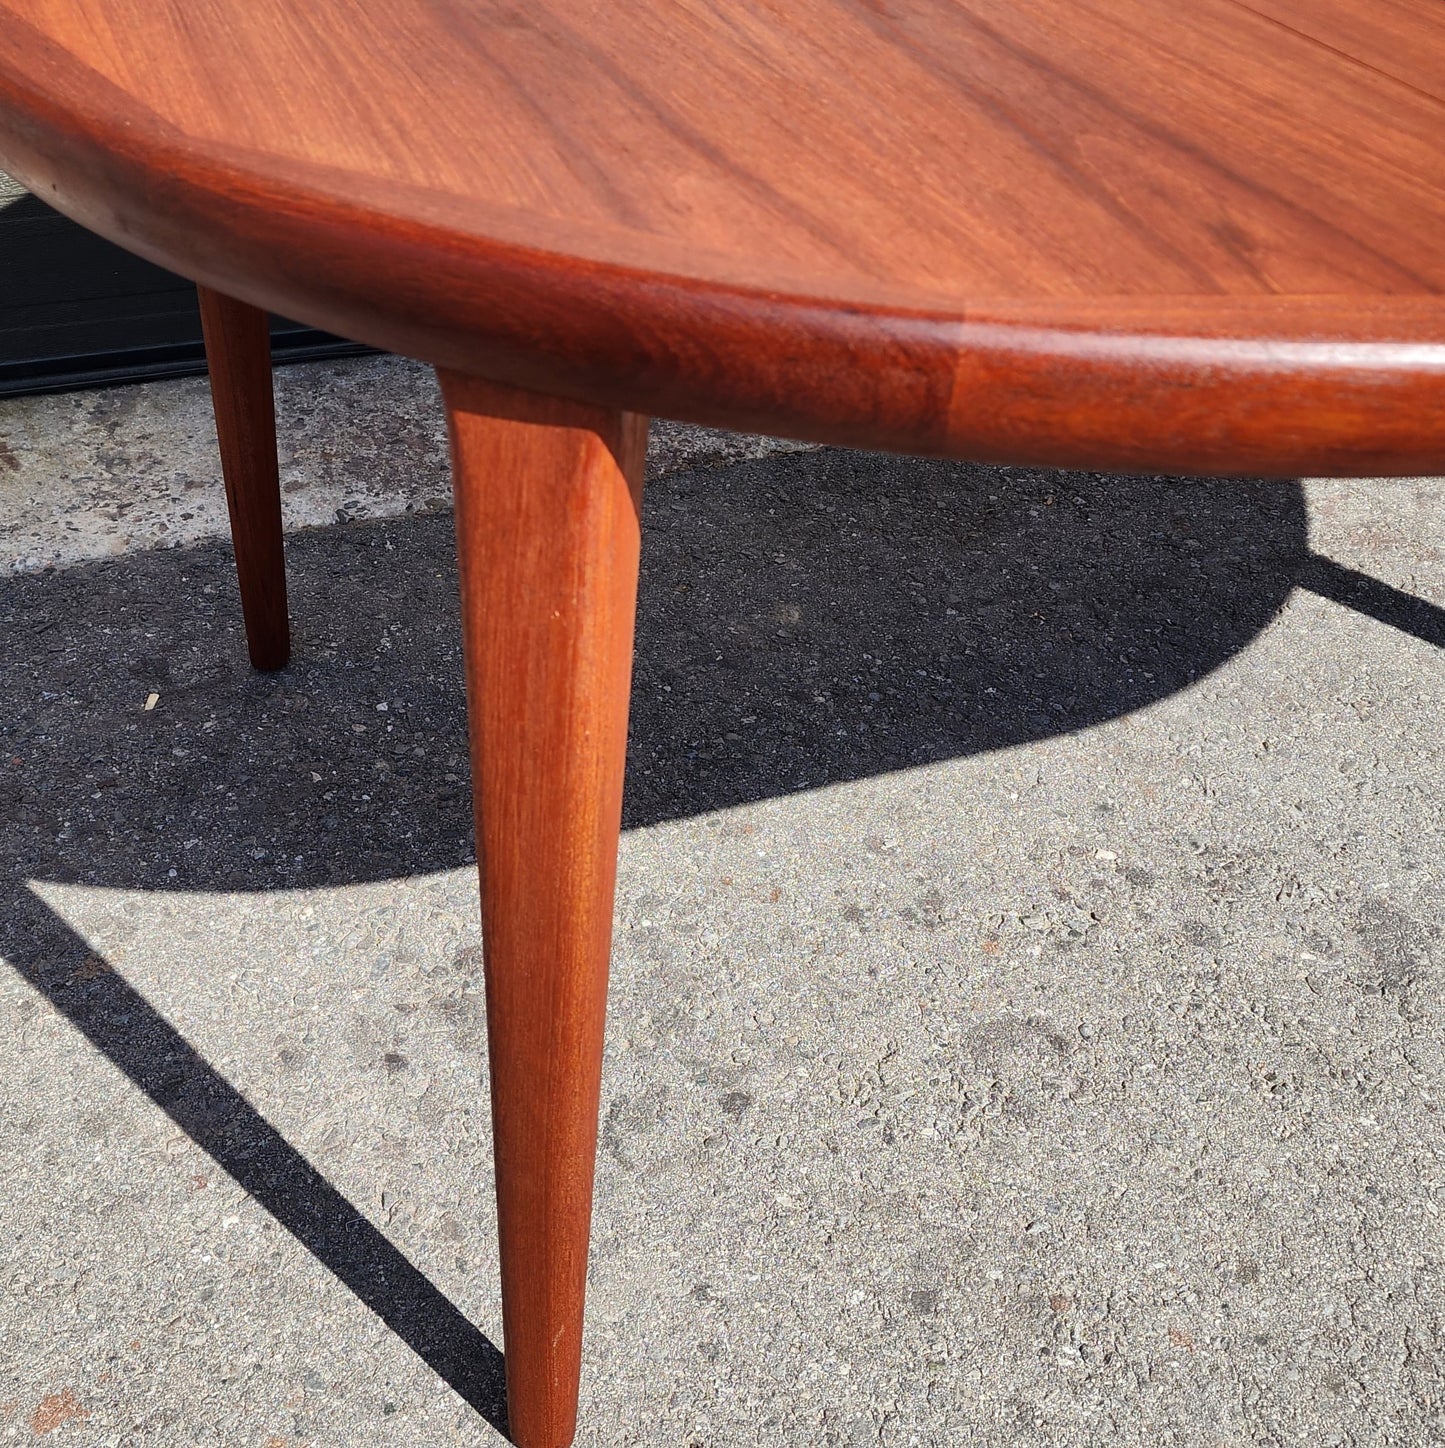 REFINISHED Danish Mid Century Modern Teak Table Round to Oval  47"- 66.5" by Spottrup